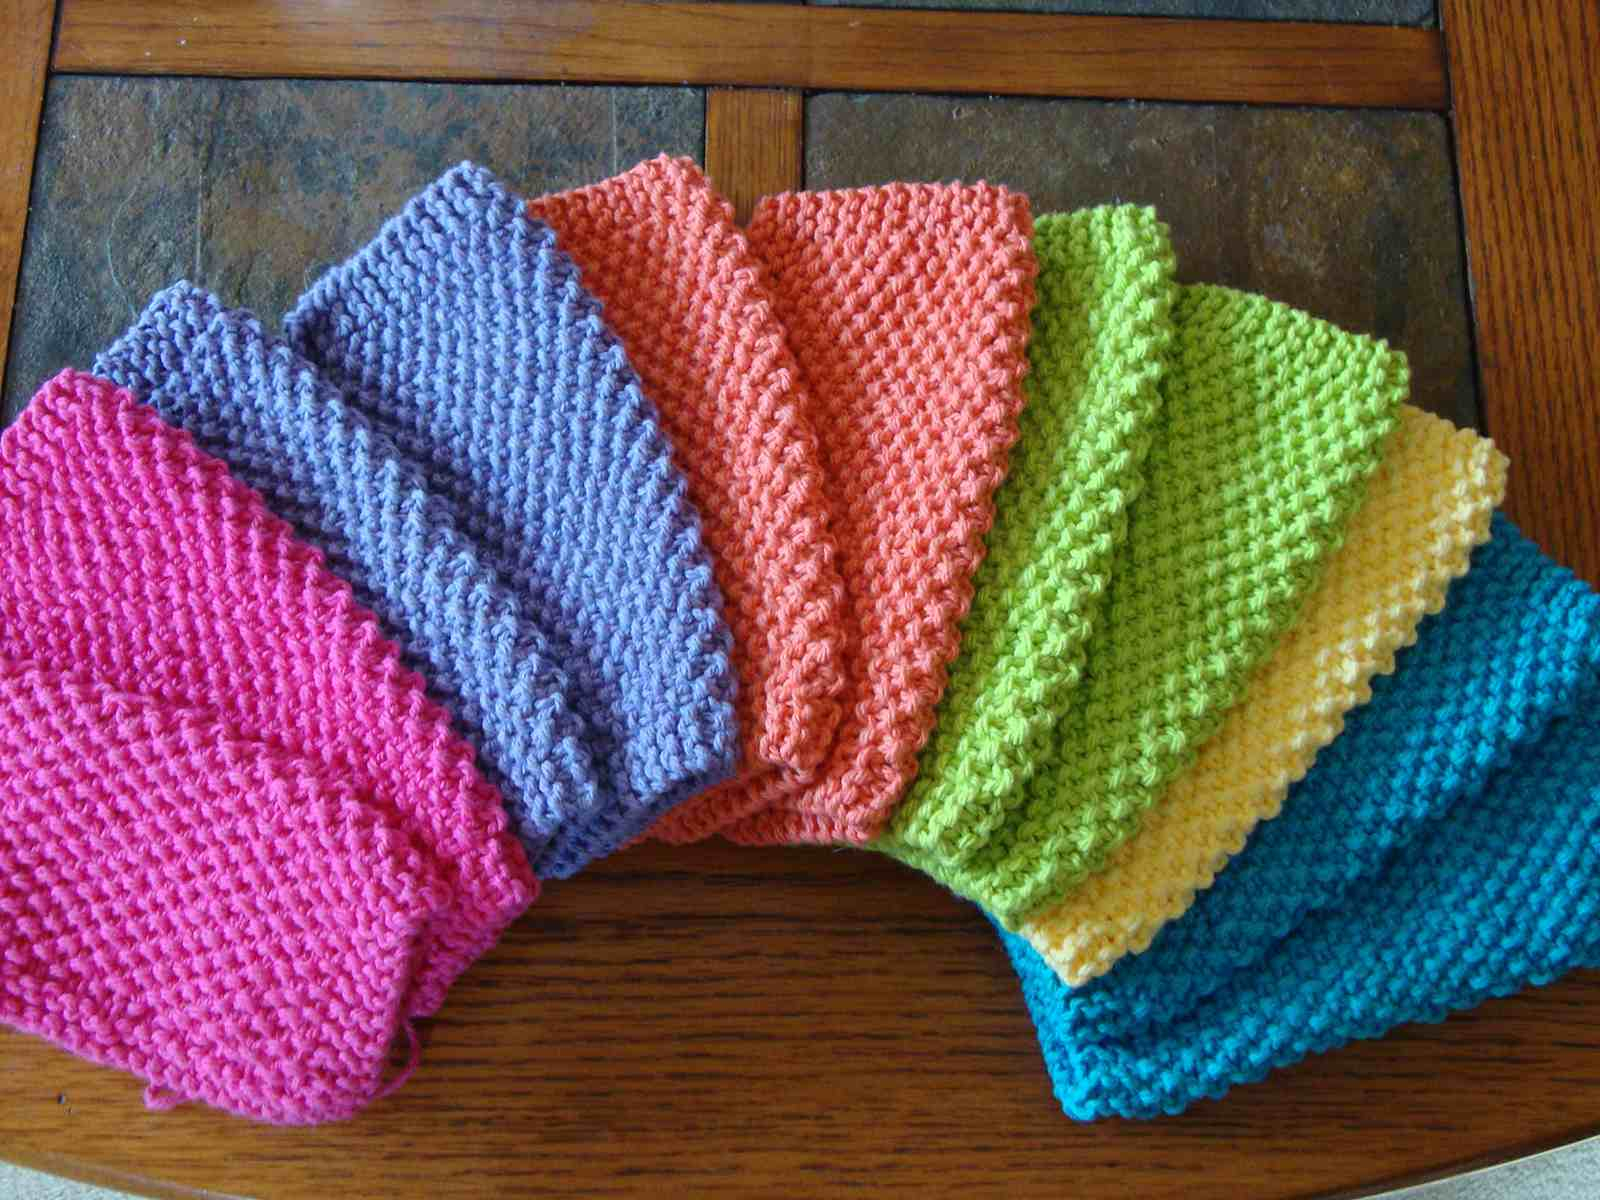 Knit Dishcloth Patterns For Beginners 10 Knit Dishcloth Patterns For Beginners